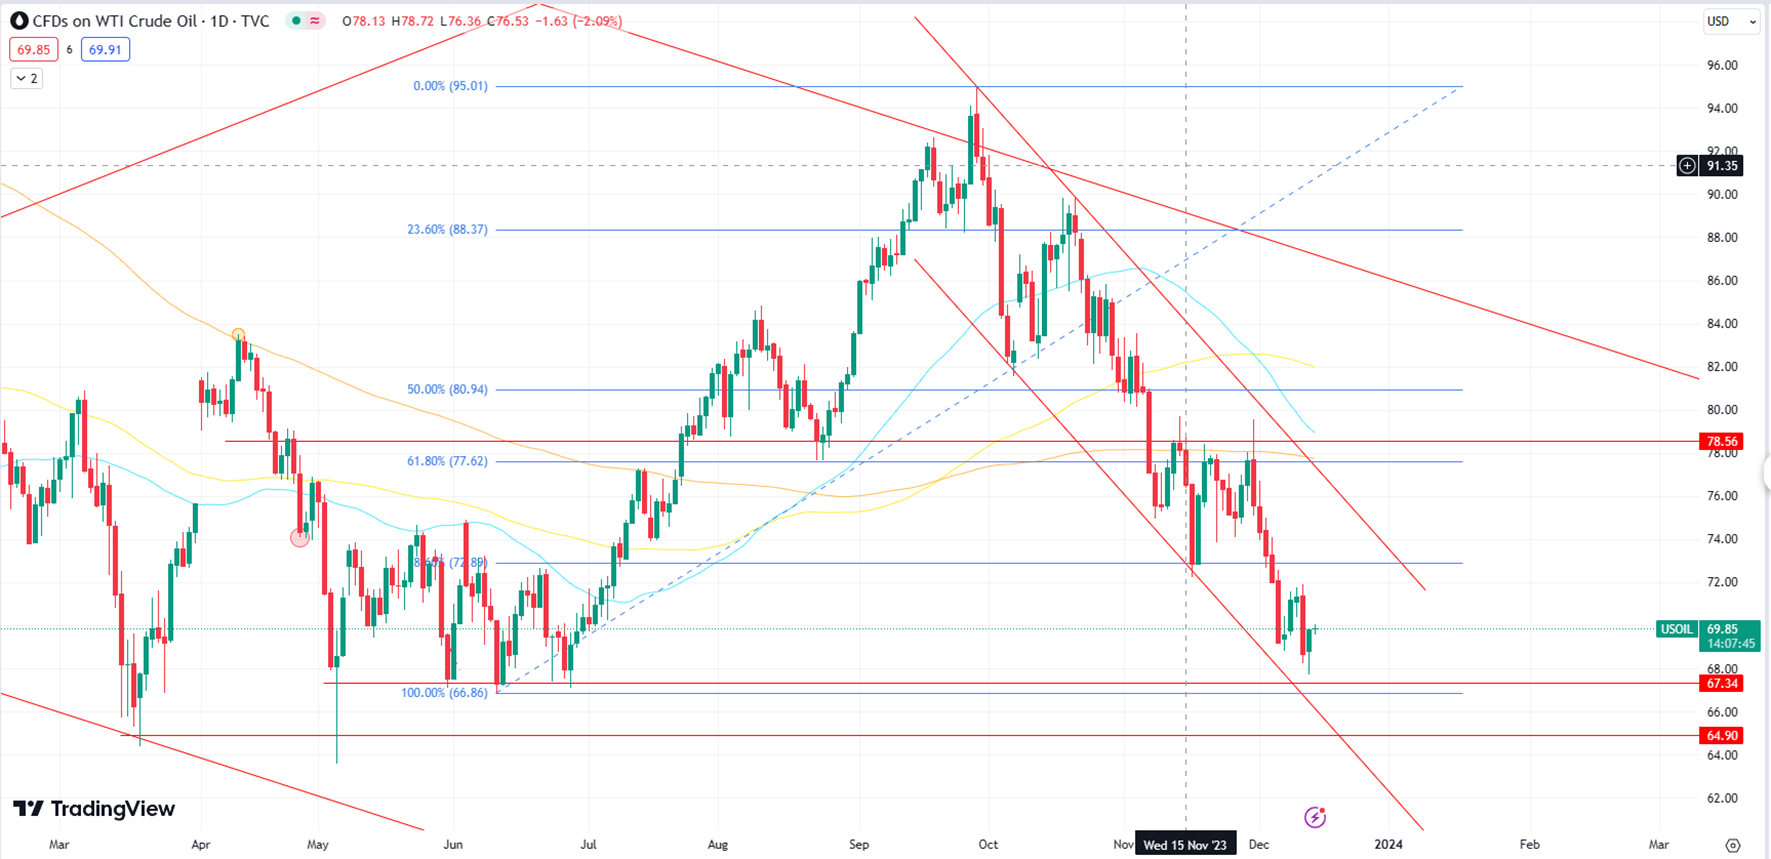 WTI Sees Modest Rebound From $68-Support Level with Ongoing Uncertainty